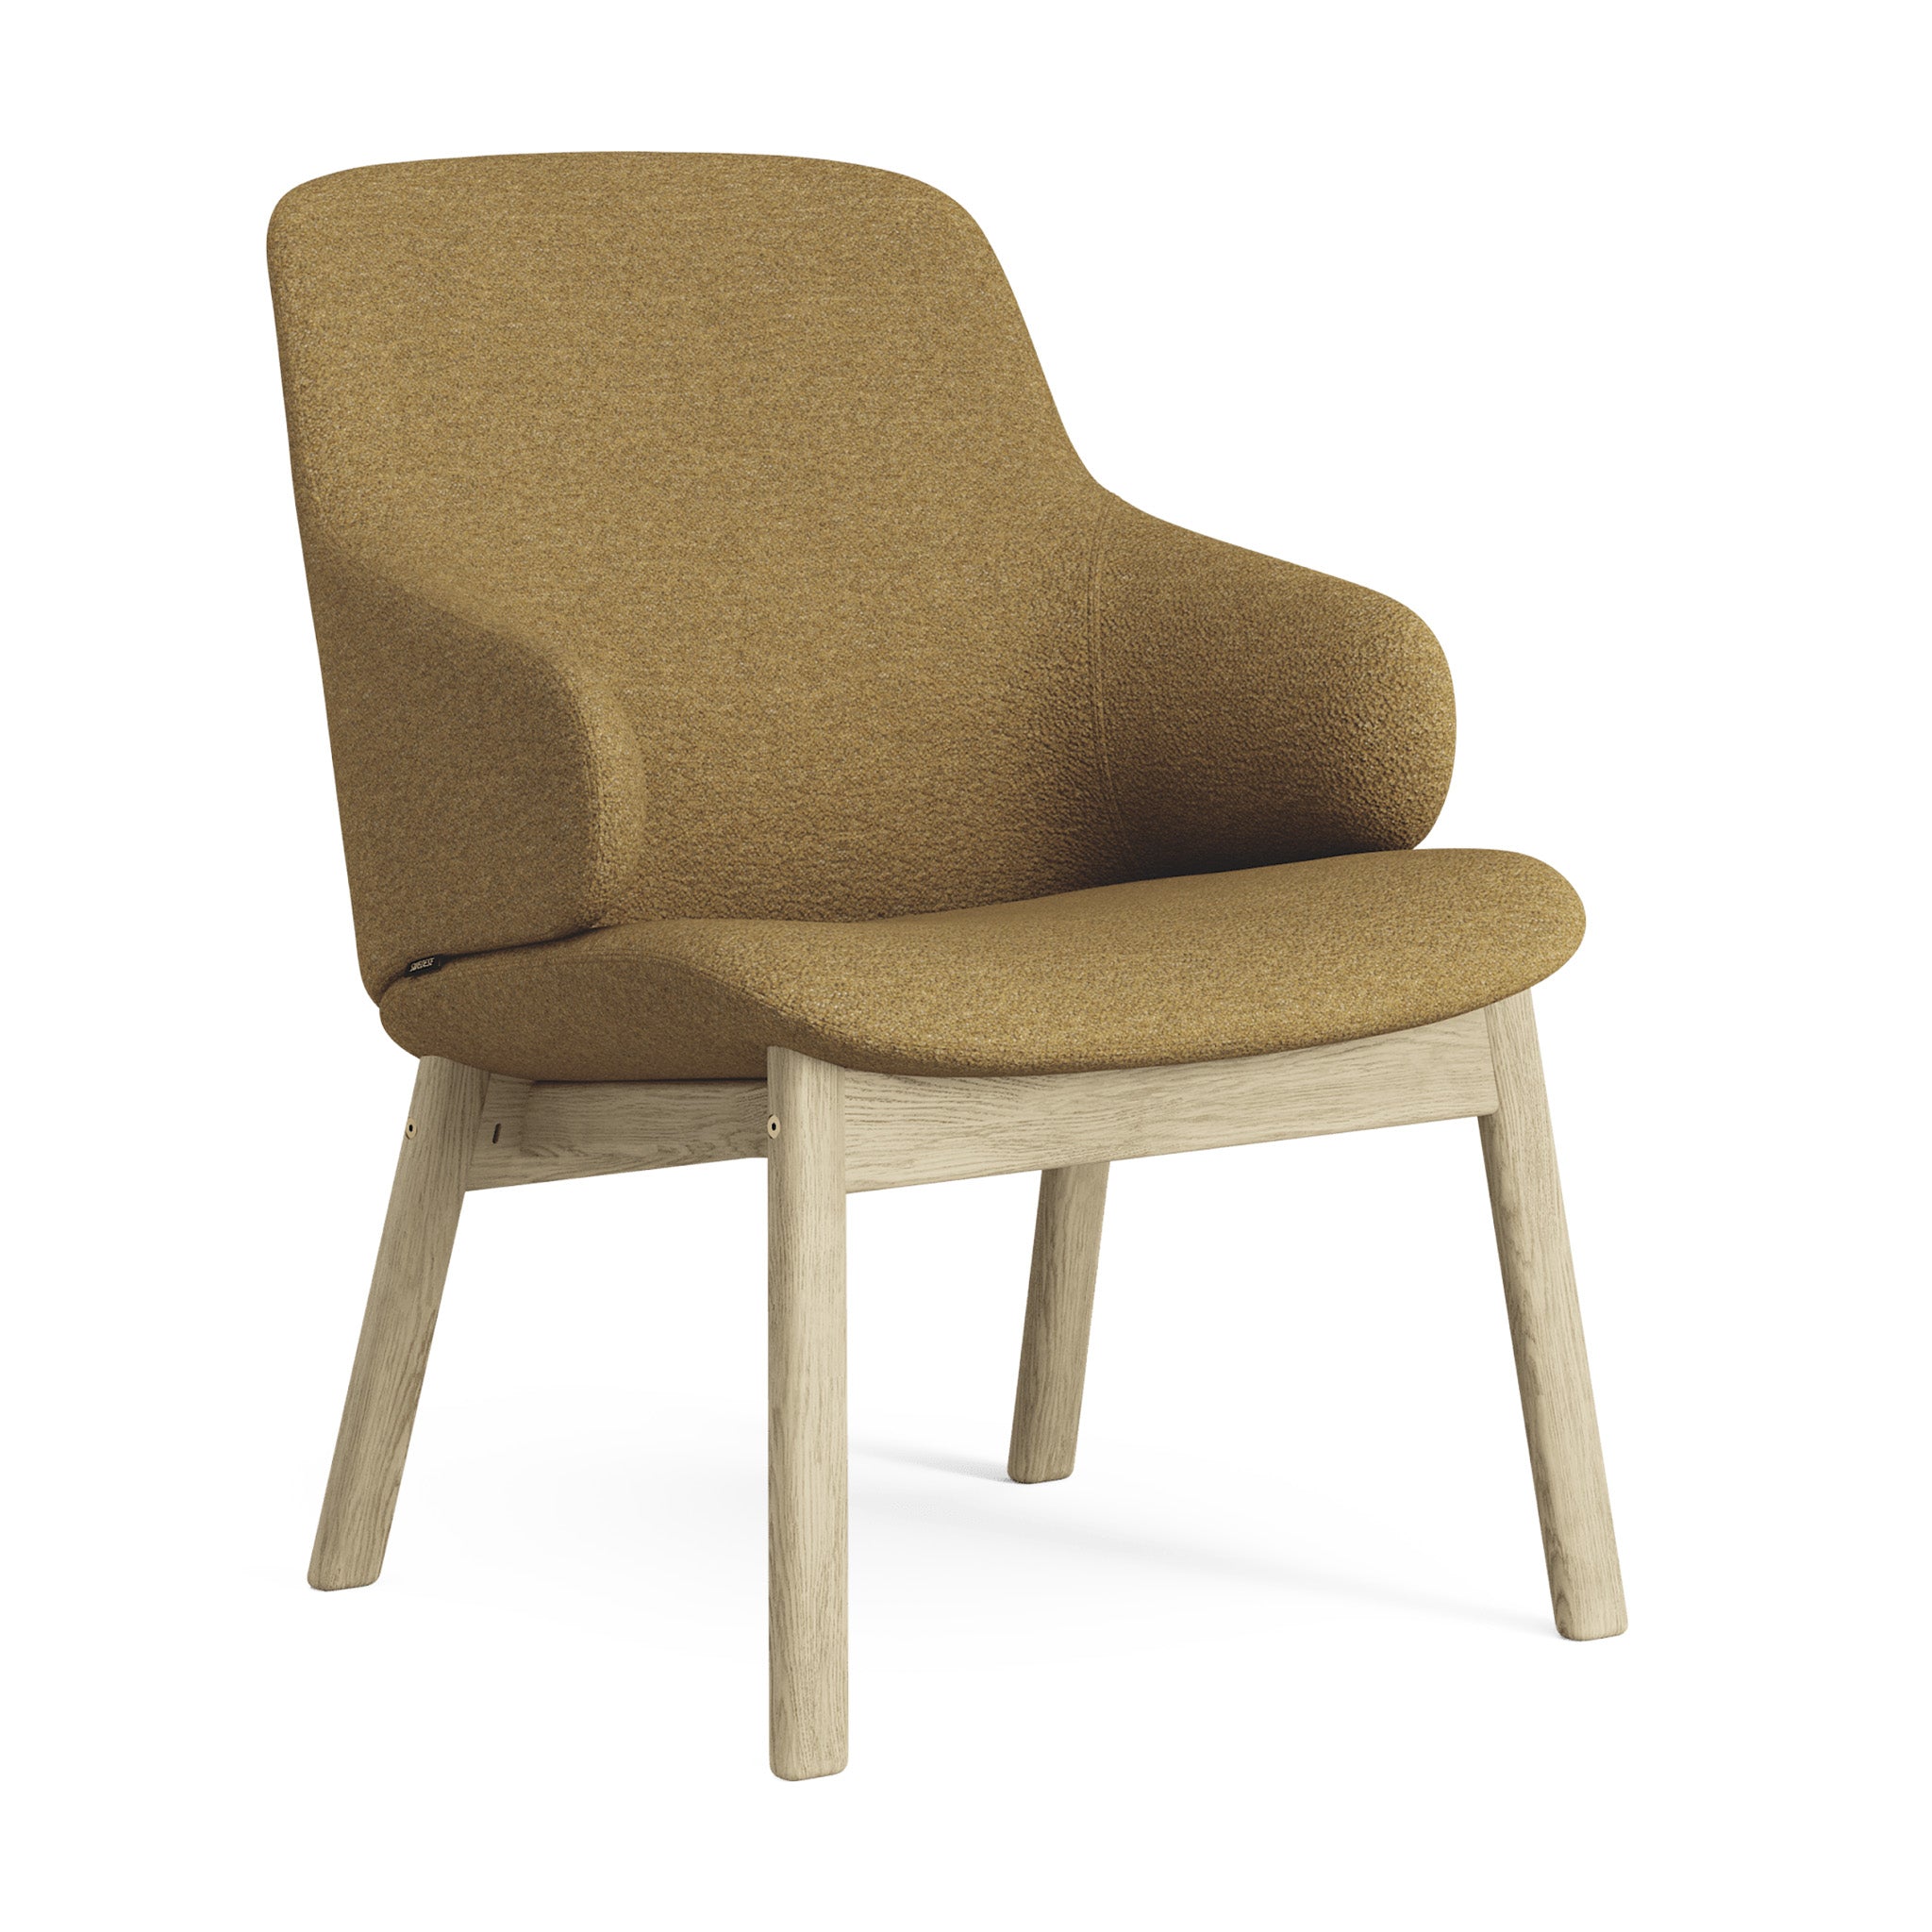 Amstelle Lounge Chair with Wooden Base by Swedese